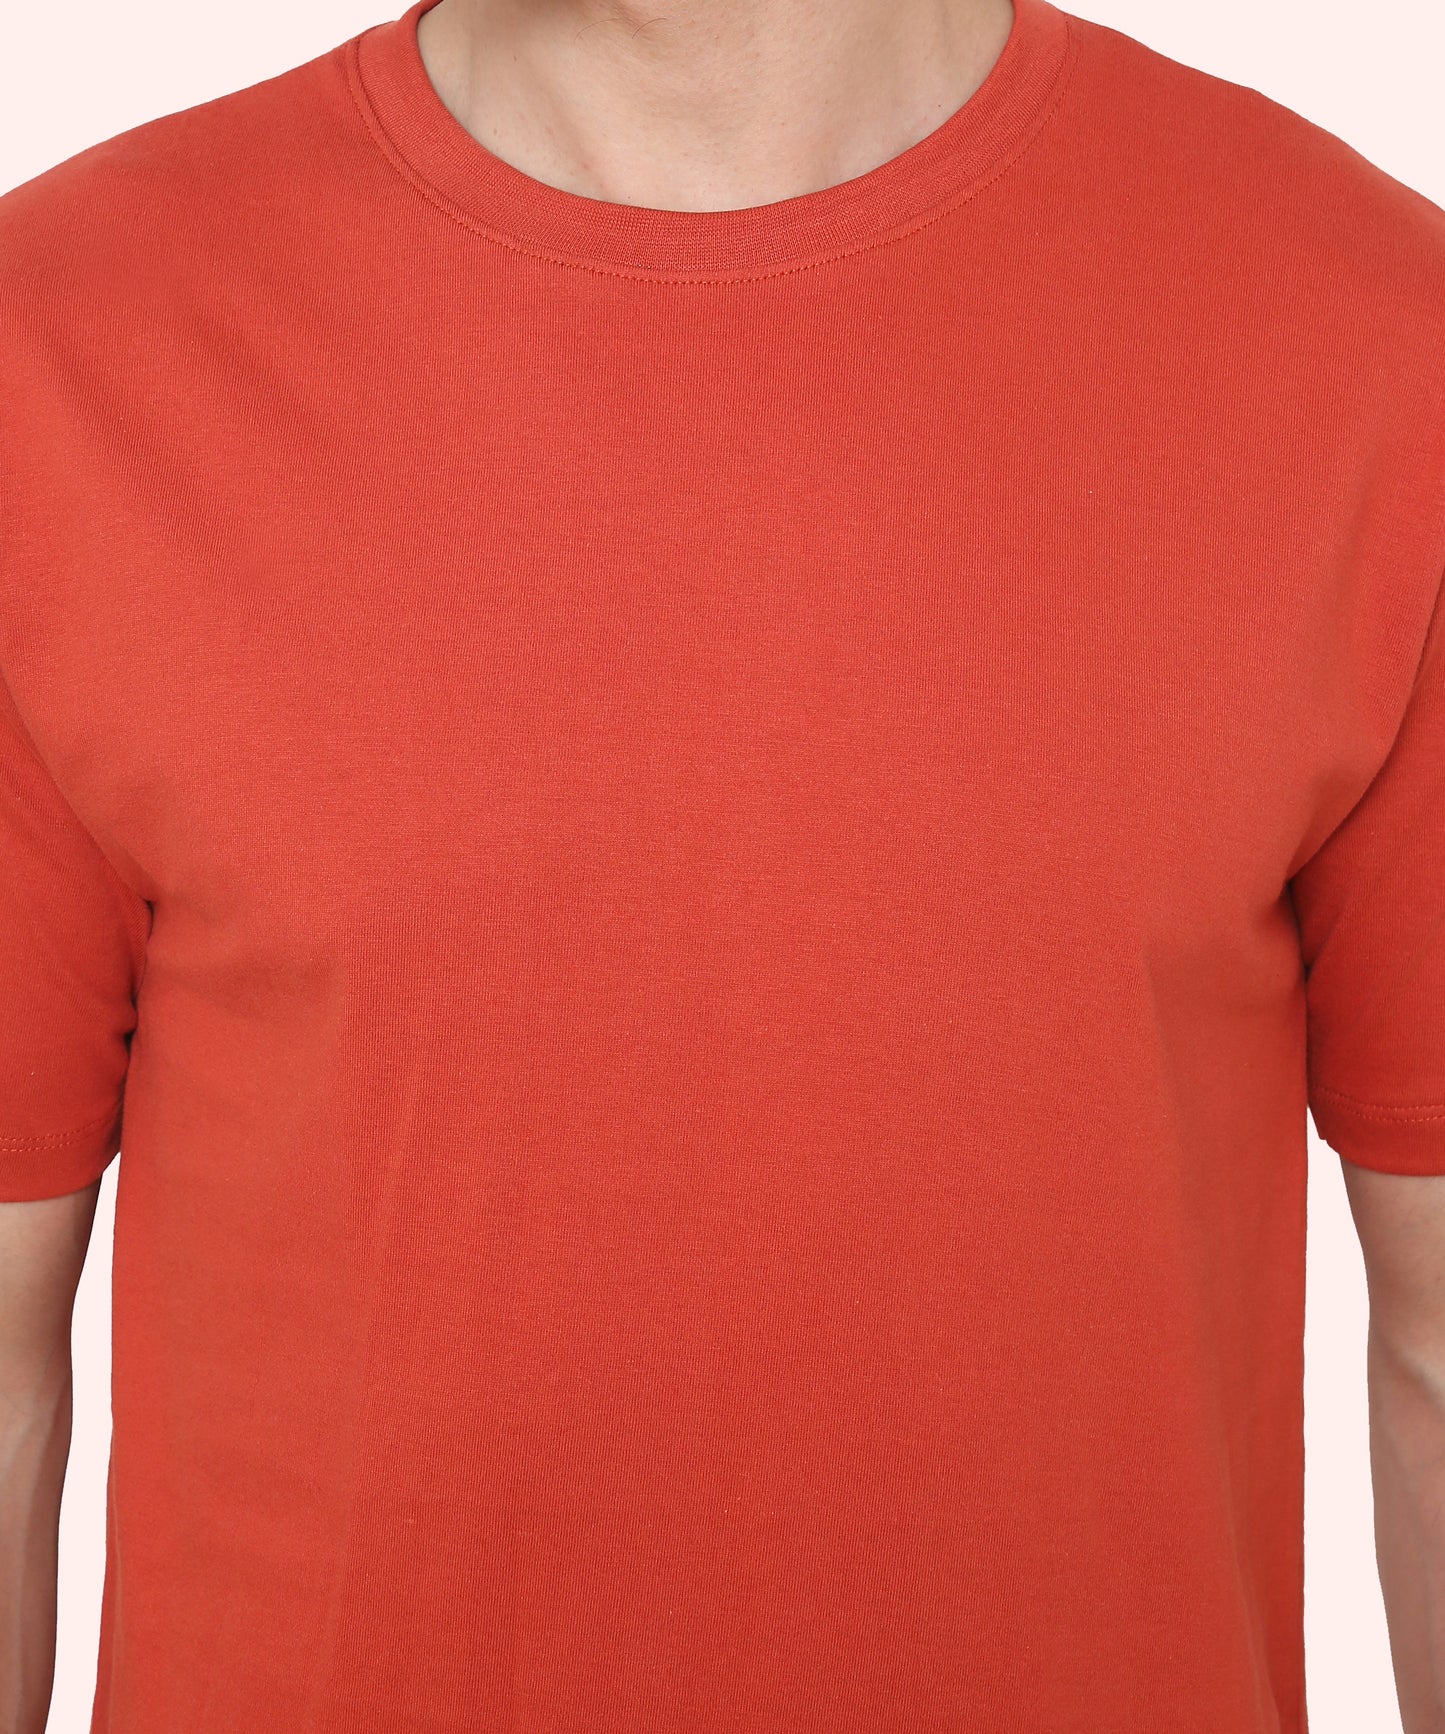 Classic Relaxed Fit Men T-shirts Orange